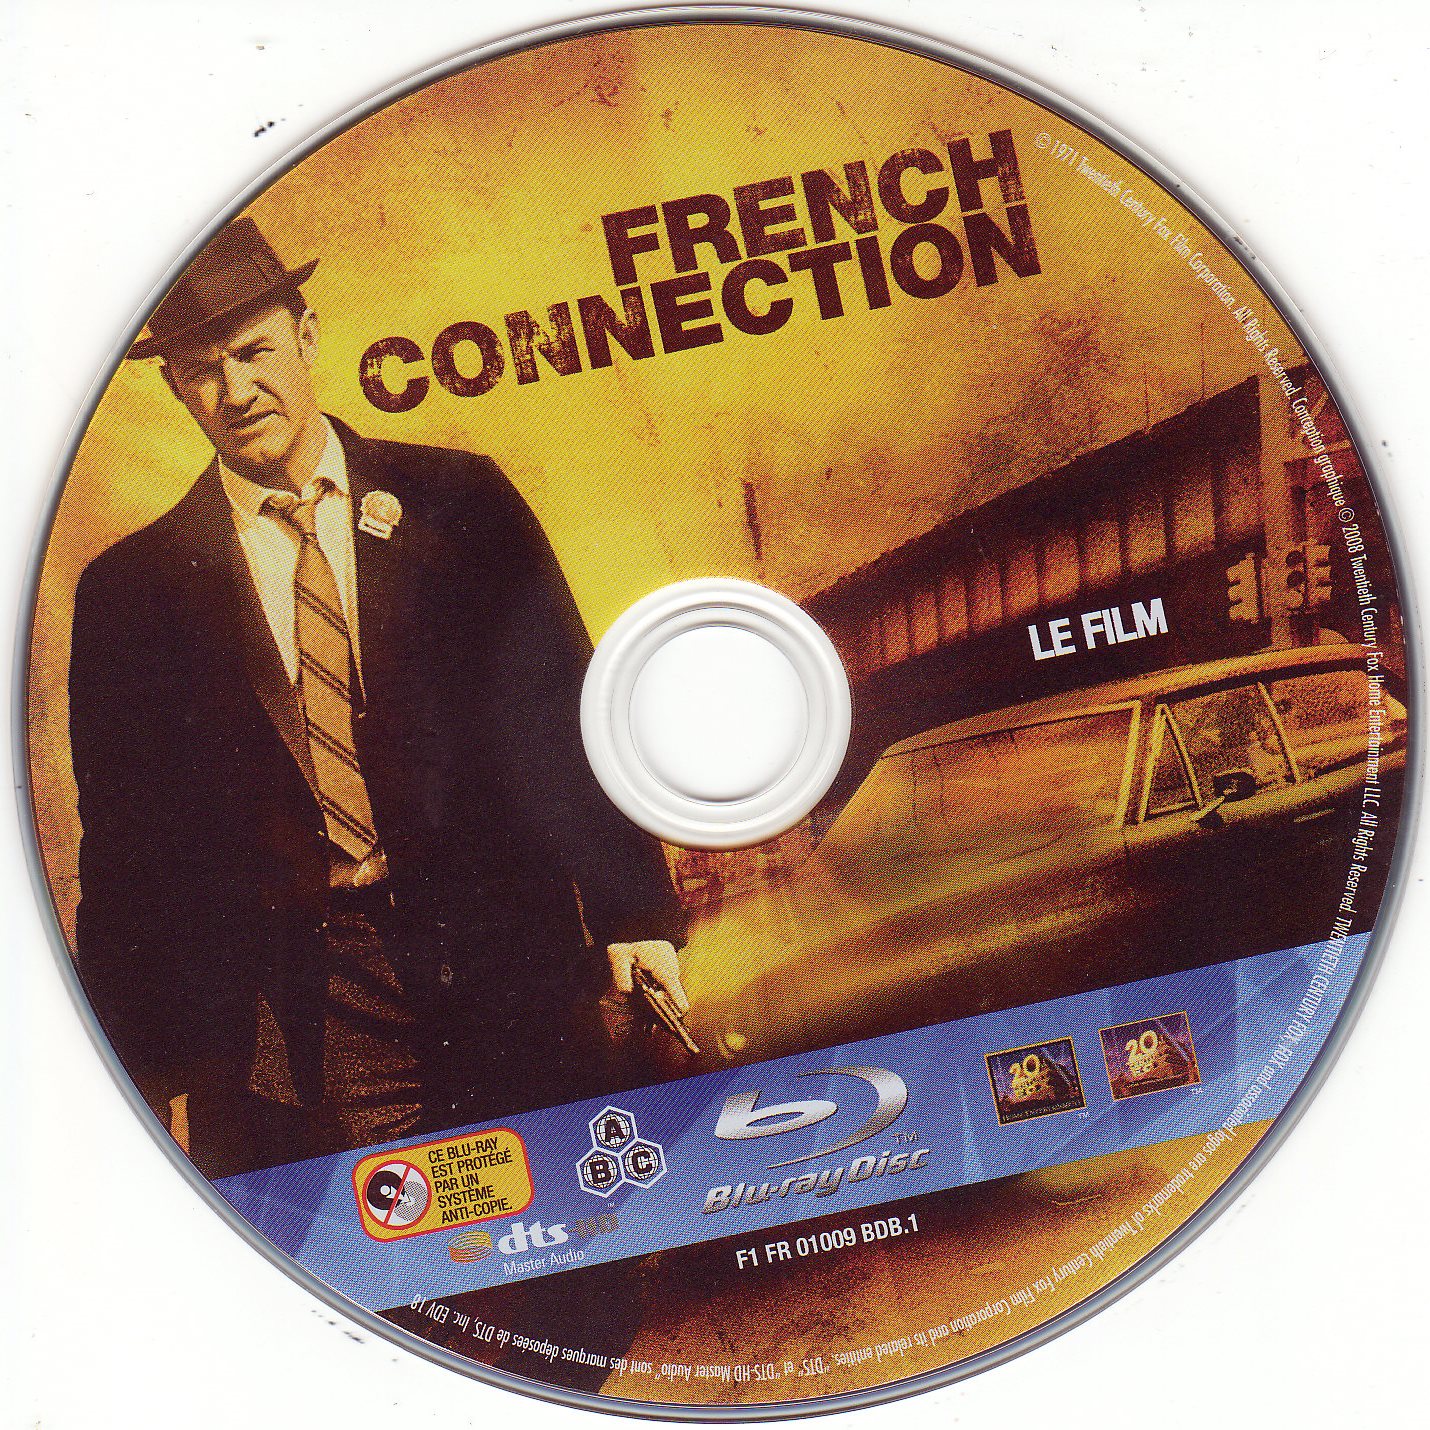 French connection (BLU-RAY)